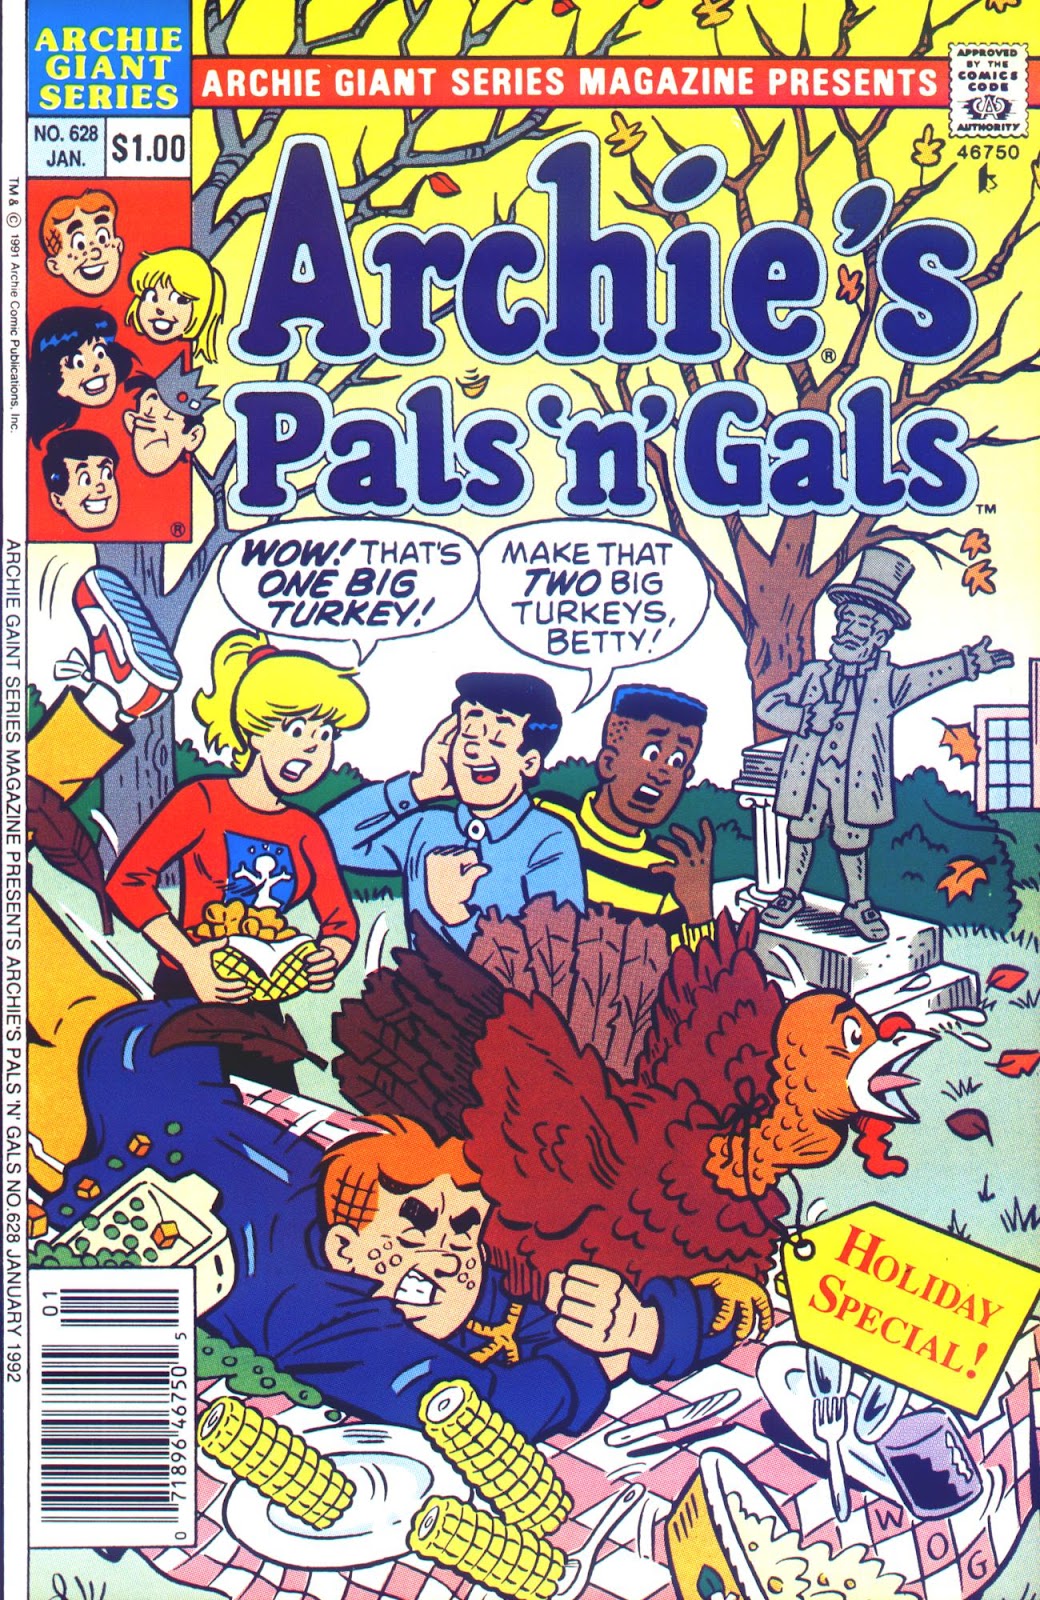 Archie Giant Series Magazine 628 Page 1